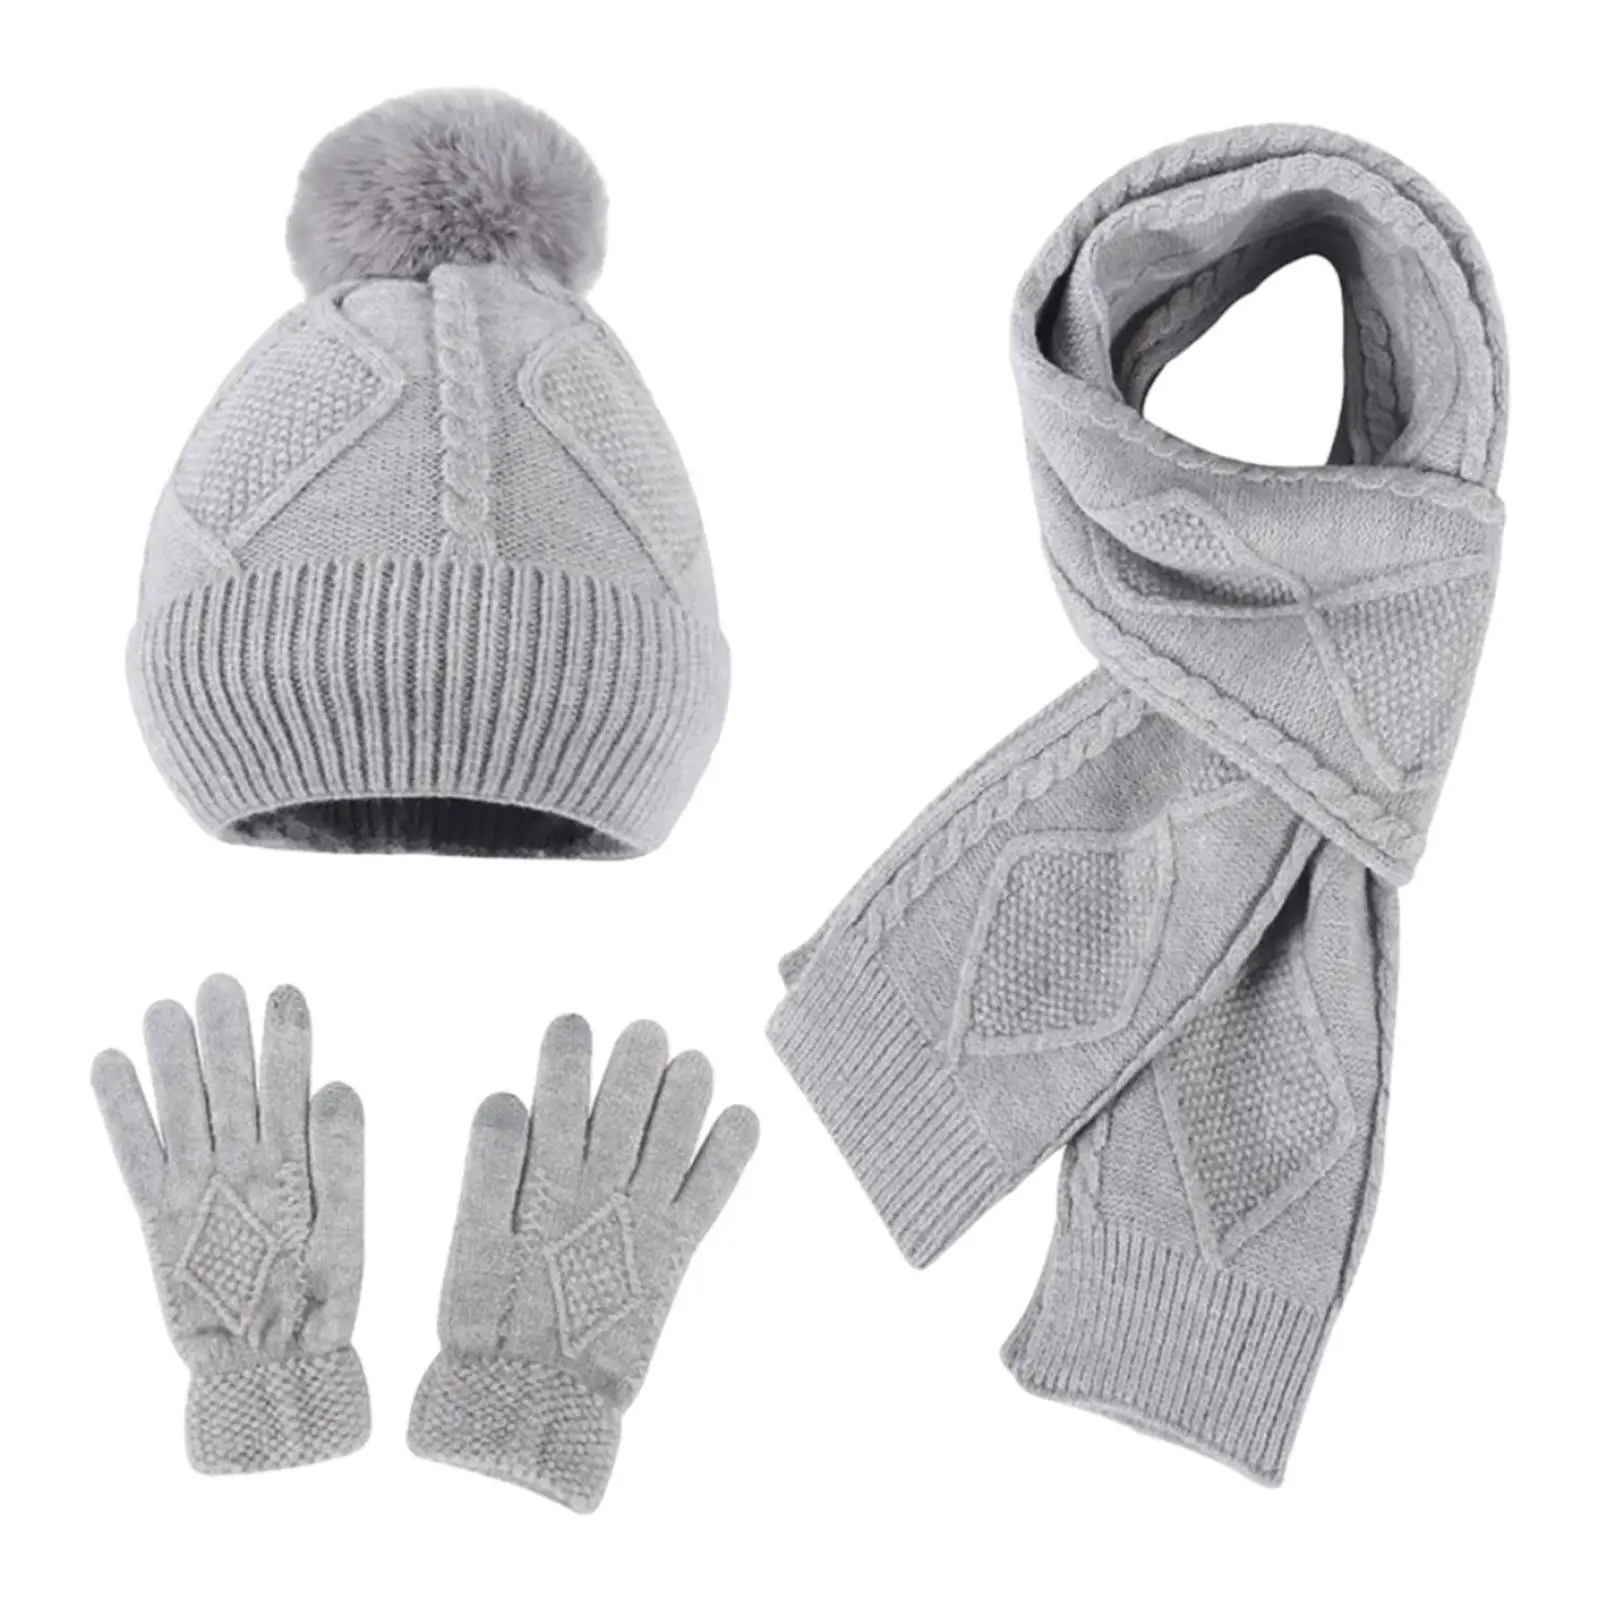 Winter Hat Scarf Gloves Set Warm Hat Men Women for Cold Weather Gifts Long Scarf for Running Party Skiing Skating Outdoor Sports